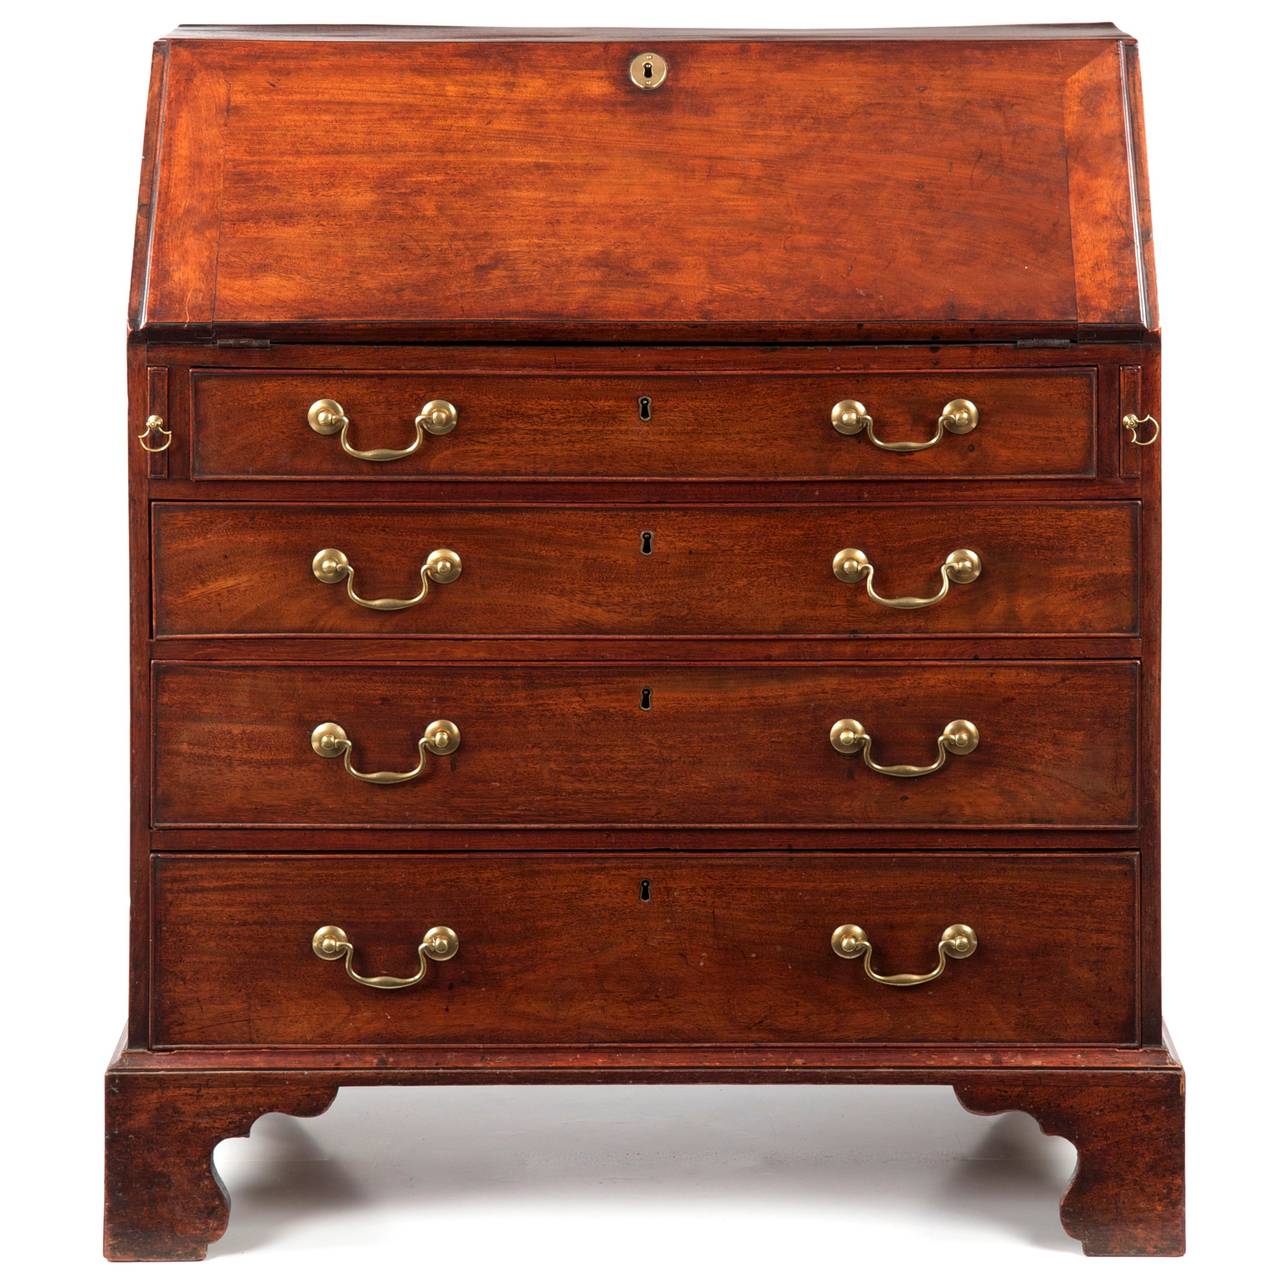 This fine antique English George III slant front desk is noteworthy for it's very attractive proportions, having a more slender frame than many of the desks of the period.  It is an object that does not impose itself on a room, but rather it's